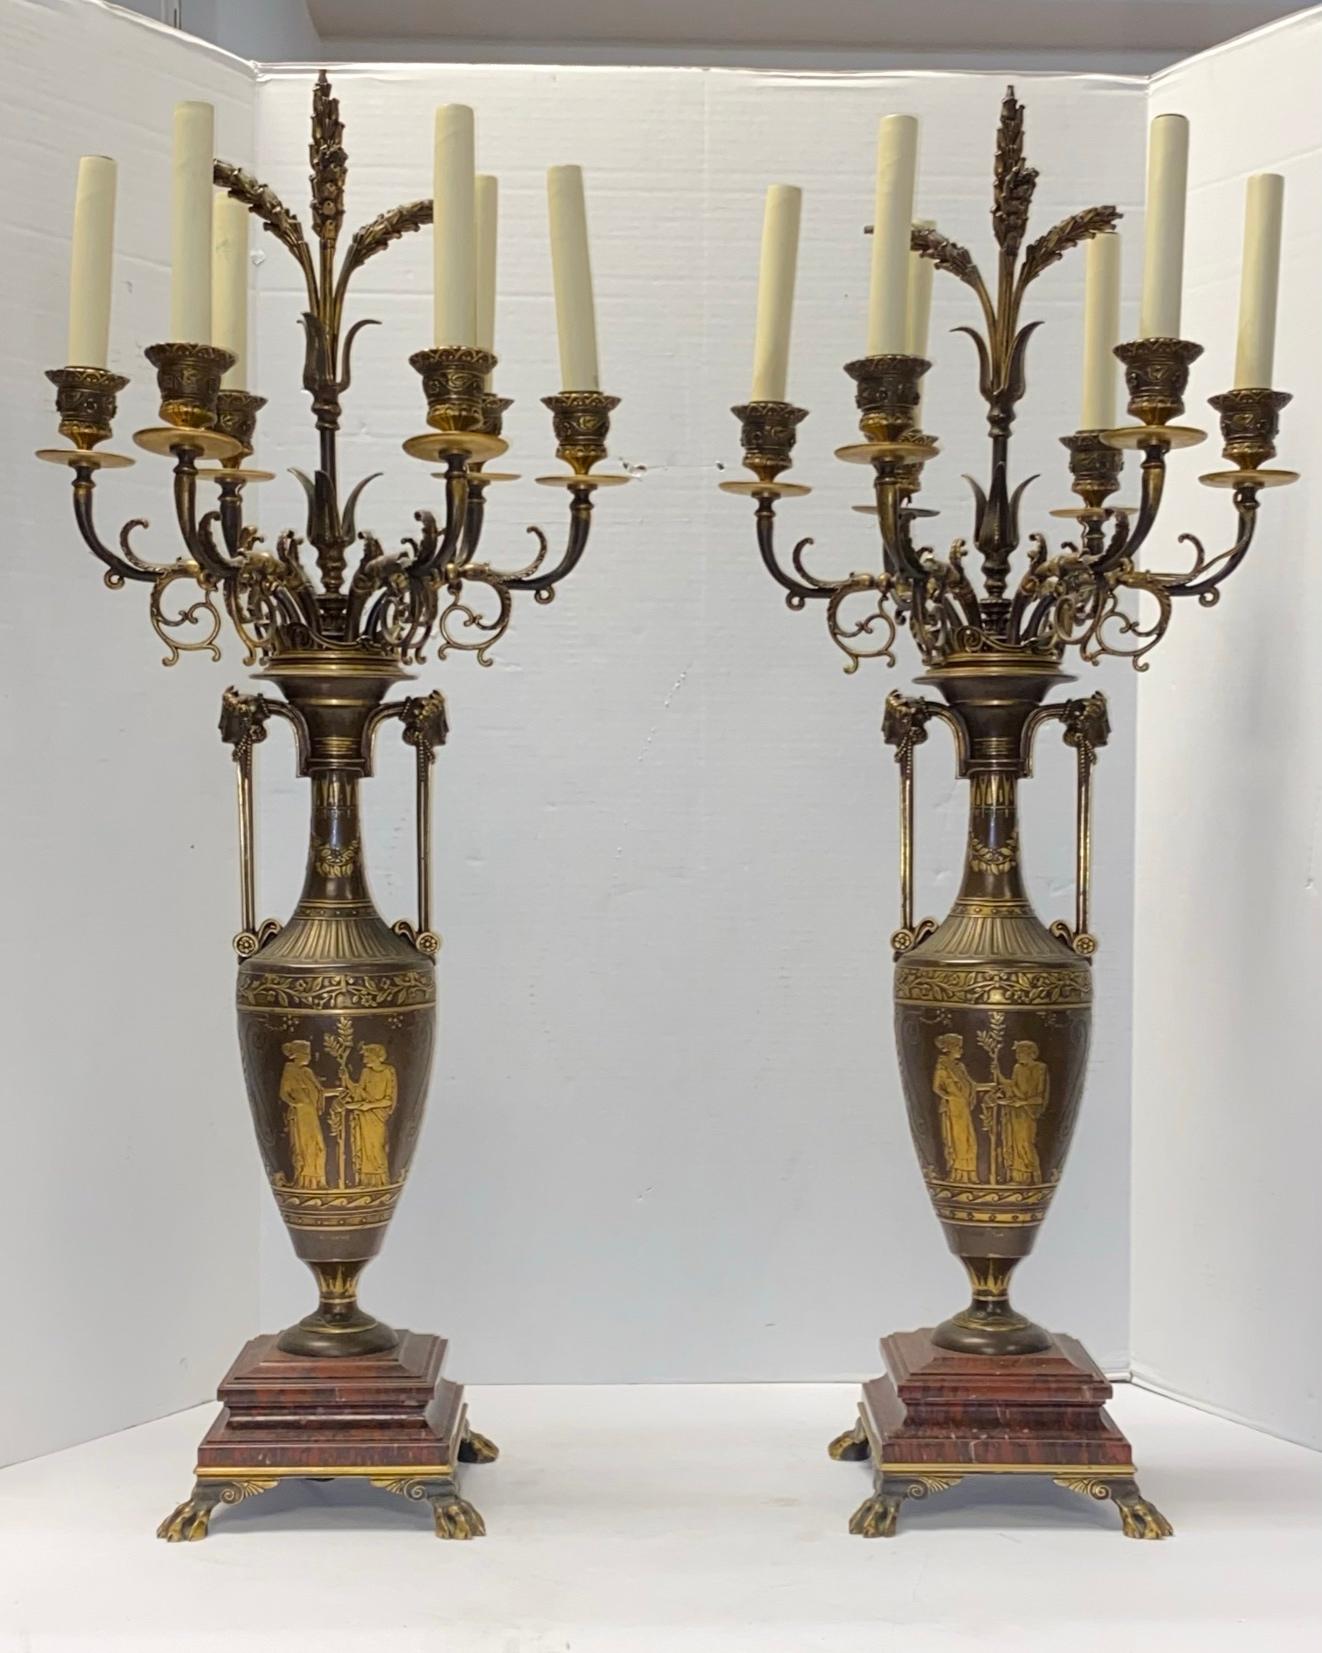 Pair of large French 19 century Greek Revival patinated bronze candelabras with gilt highlights on Rouge marble bases.
Wired as lamps .
Signed : F. Barbedienne Fondeur.